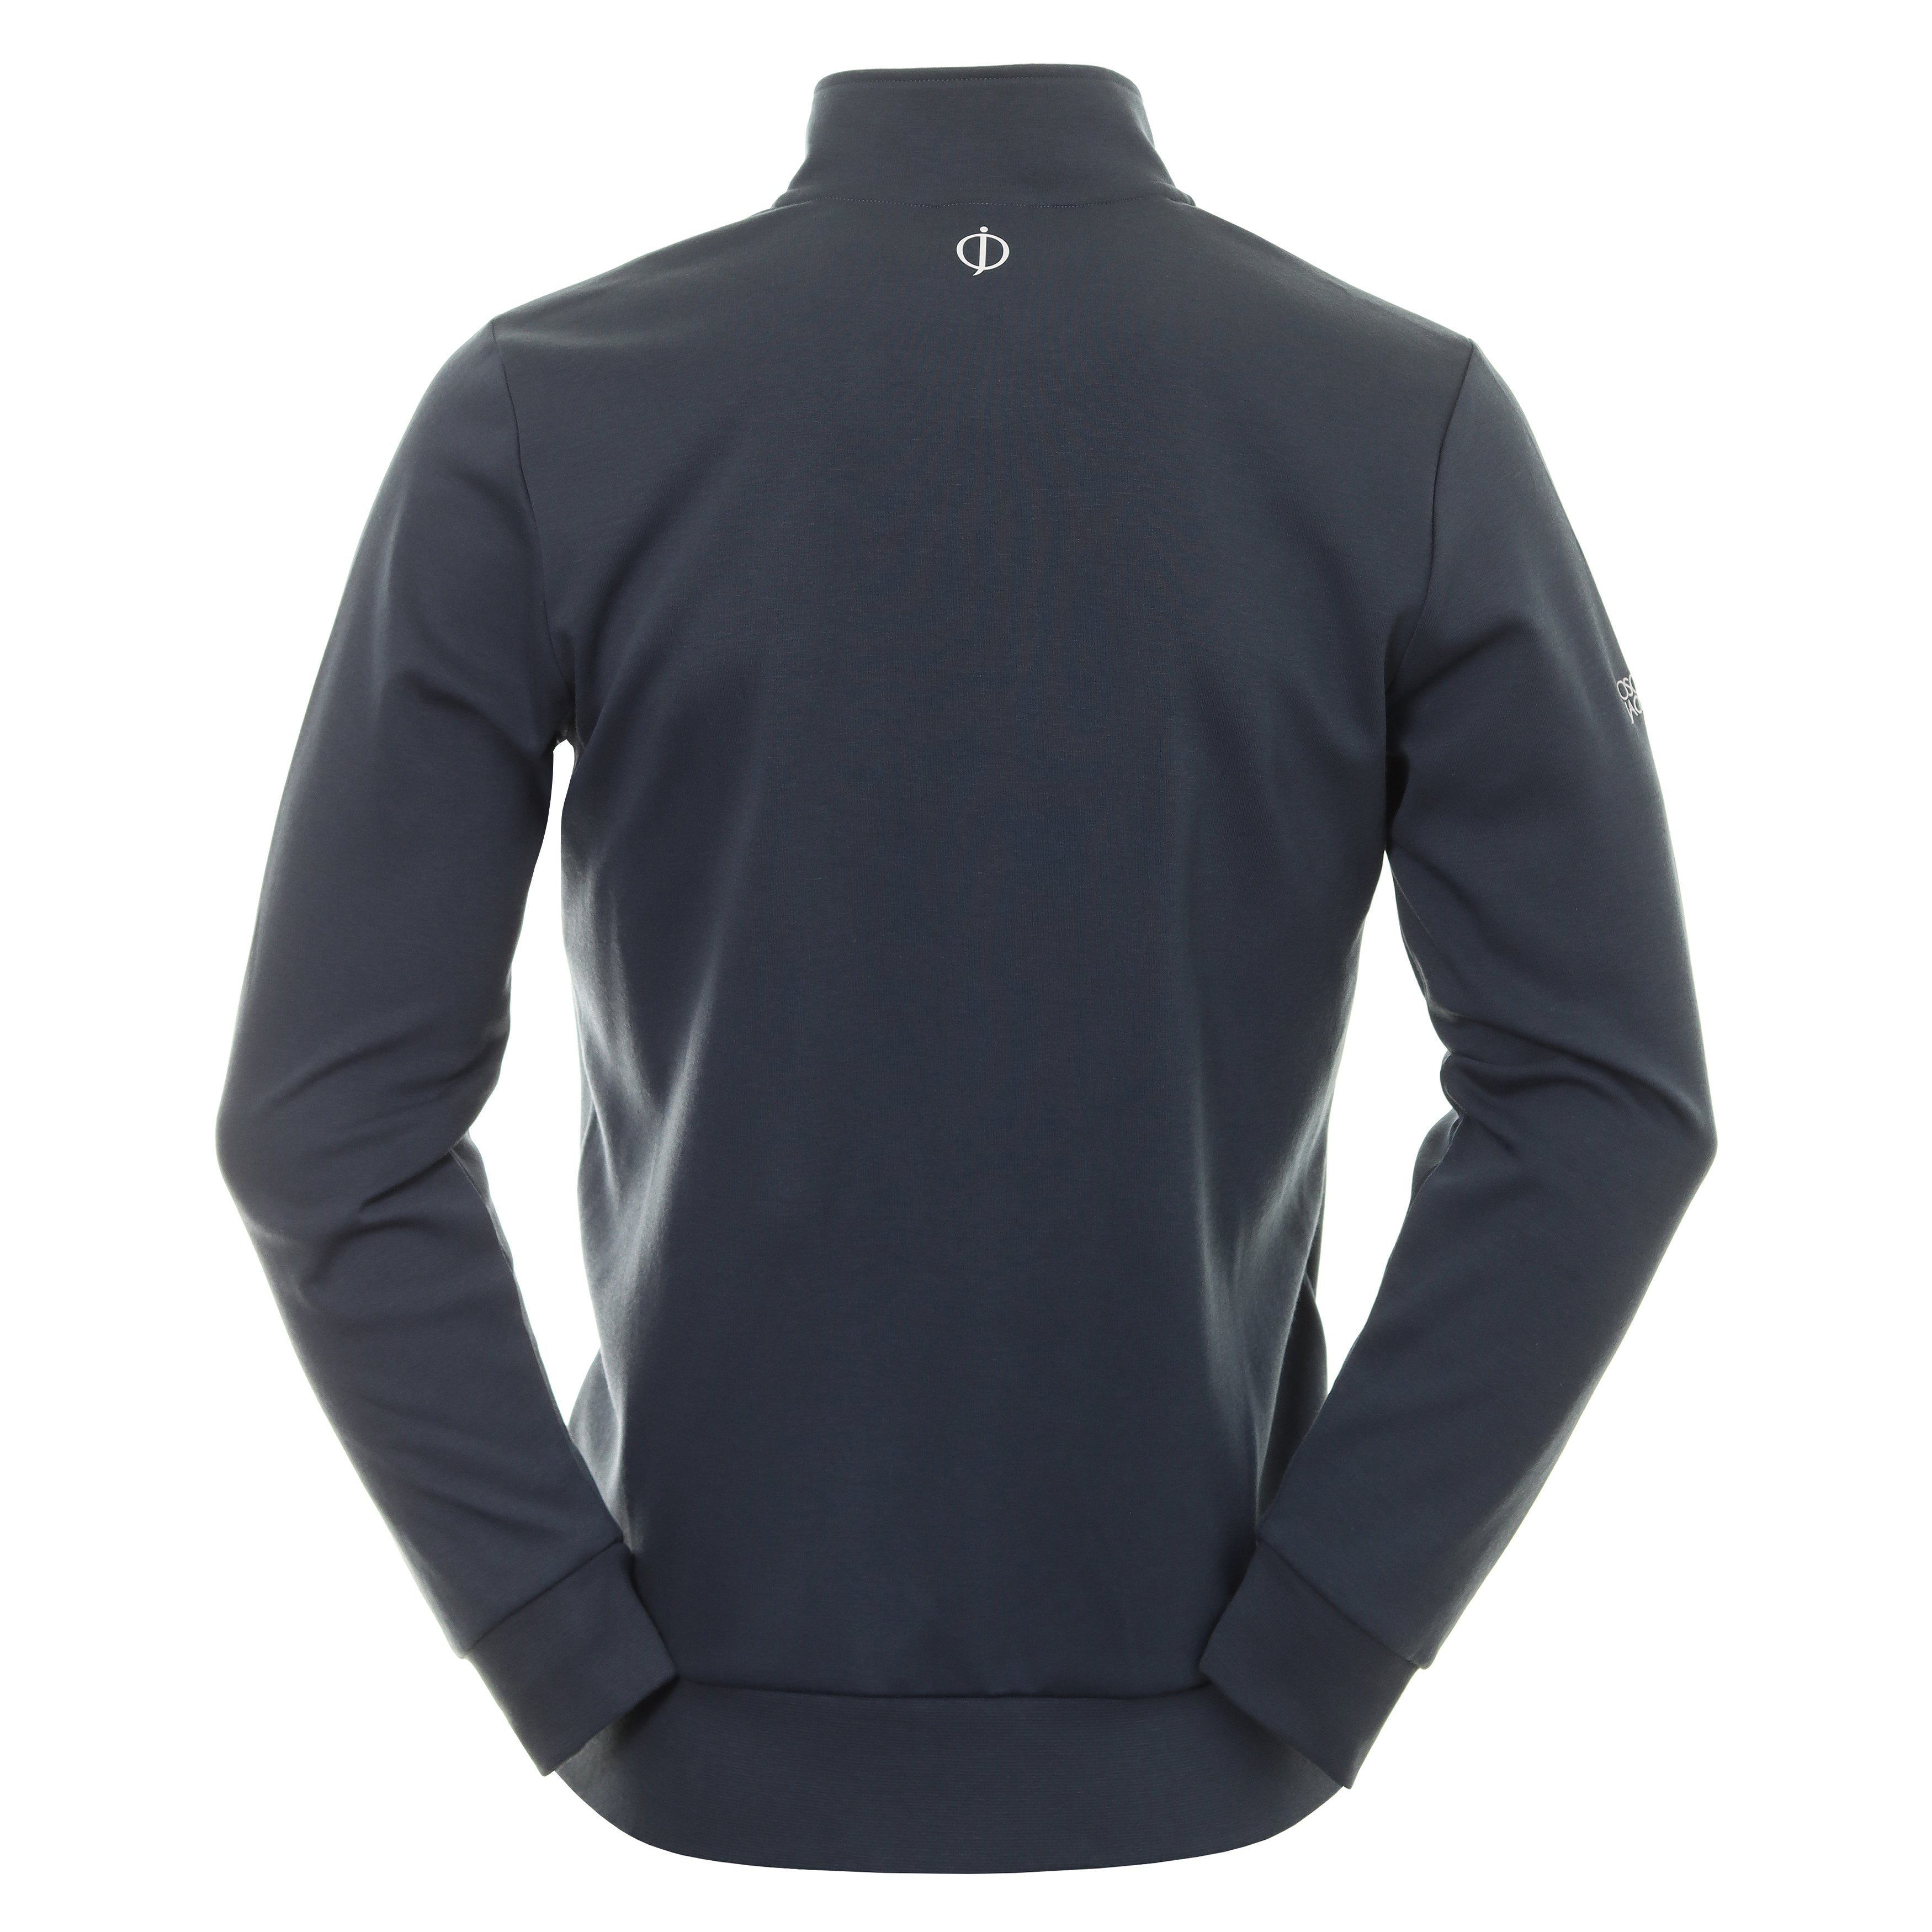 Oscar Jacobson Hawkes II Tour Pullover OJTOP0076 China Blue ...